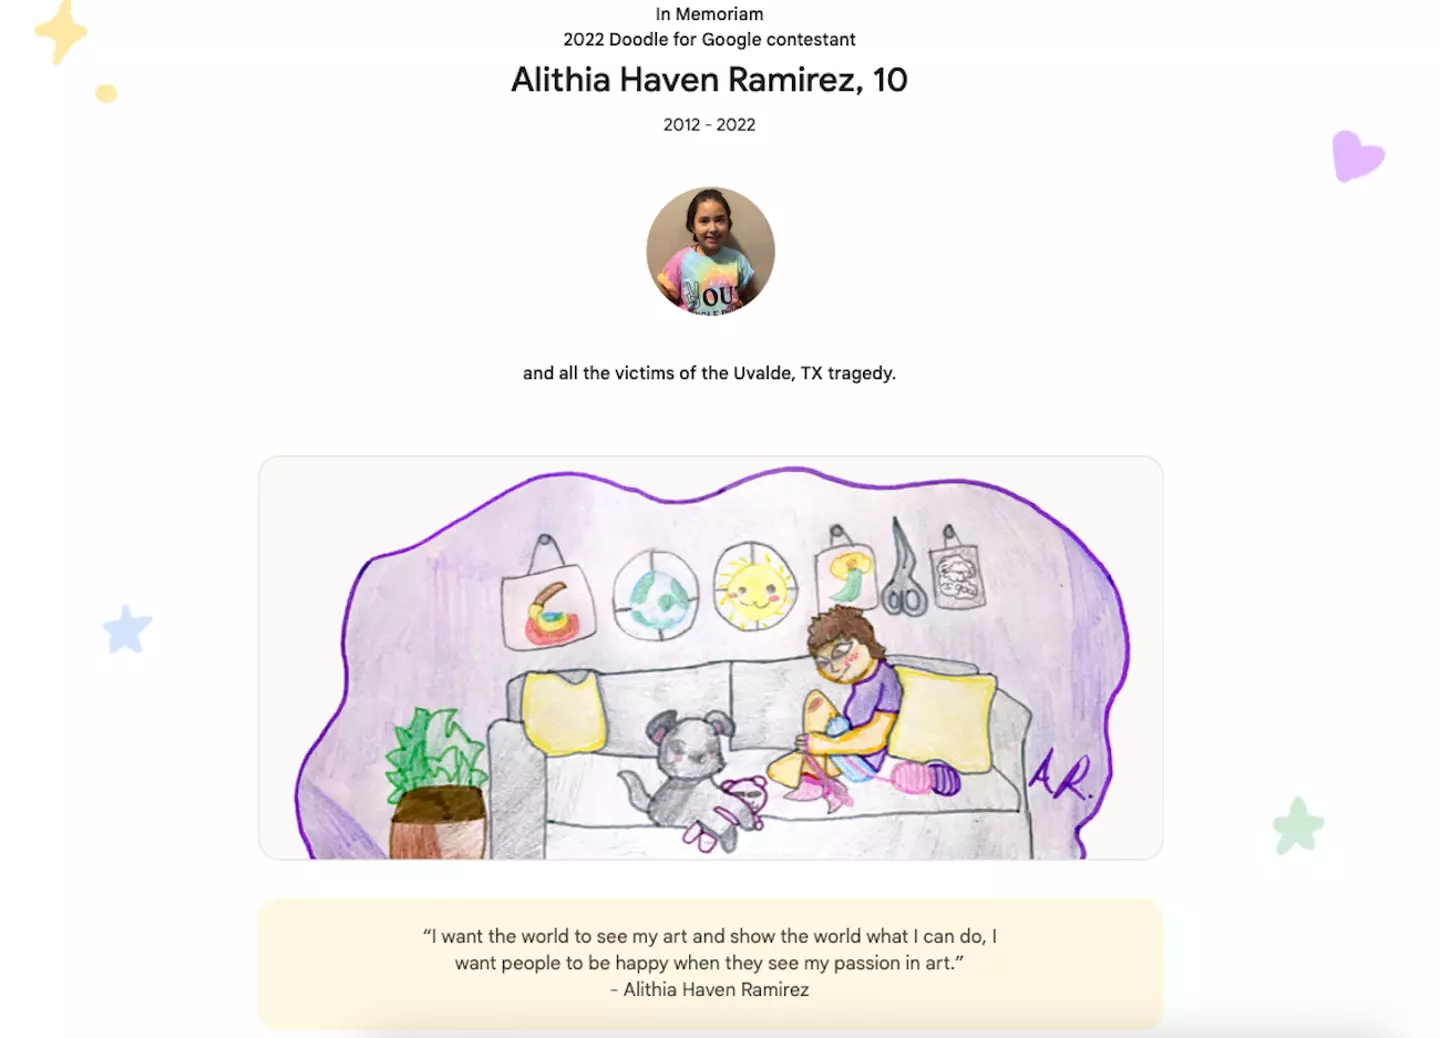 Alithia entered the competition prior to the March deadline.